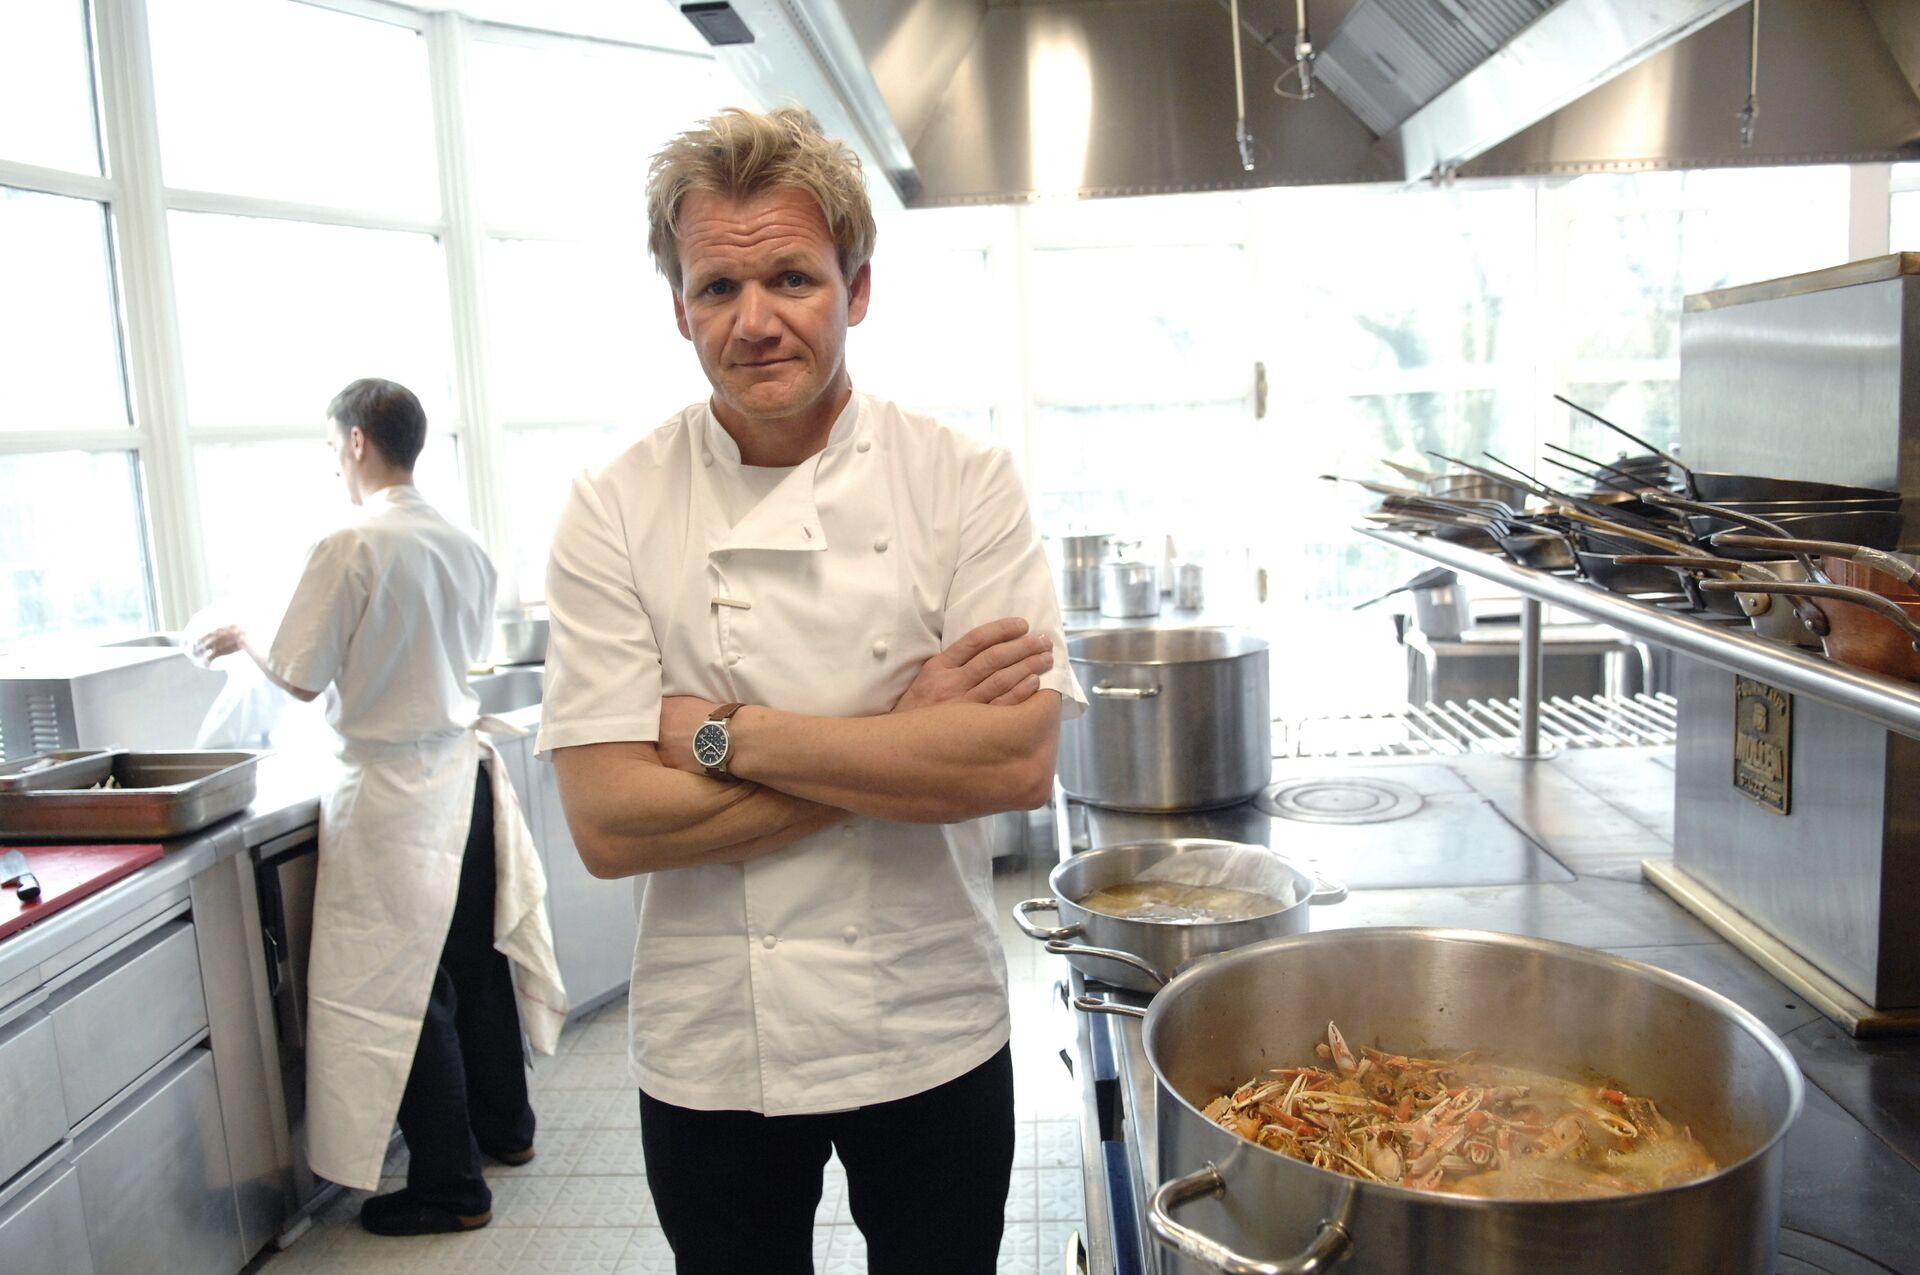 British chef Gordon Ramsay poses at the Trianon palace restaurant on March 20, 2008 in Versailles, west of Paris.  - Sputnik International, 1920, 08.12.2021